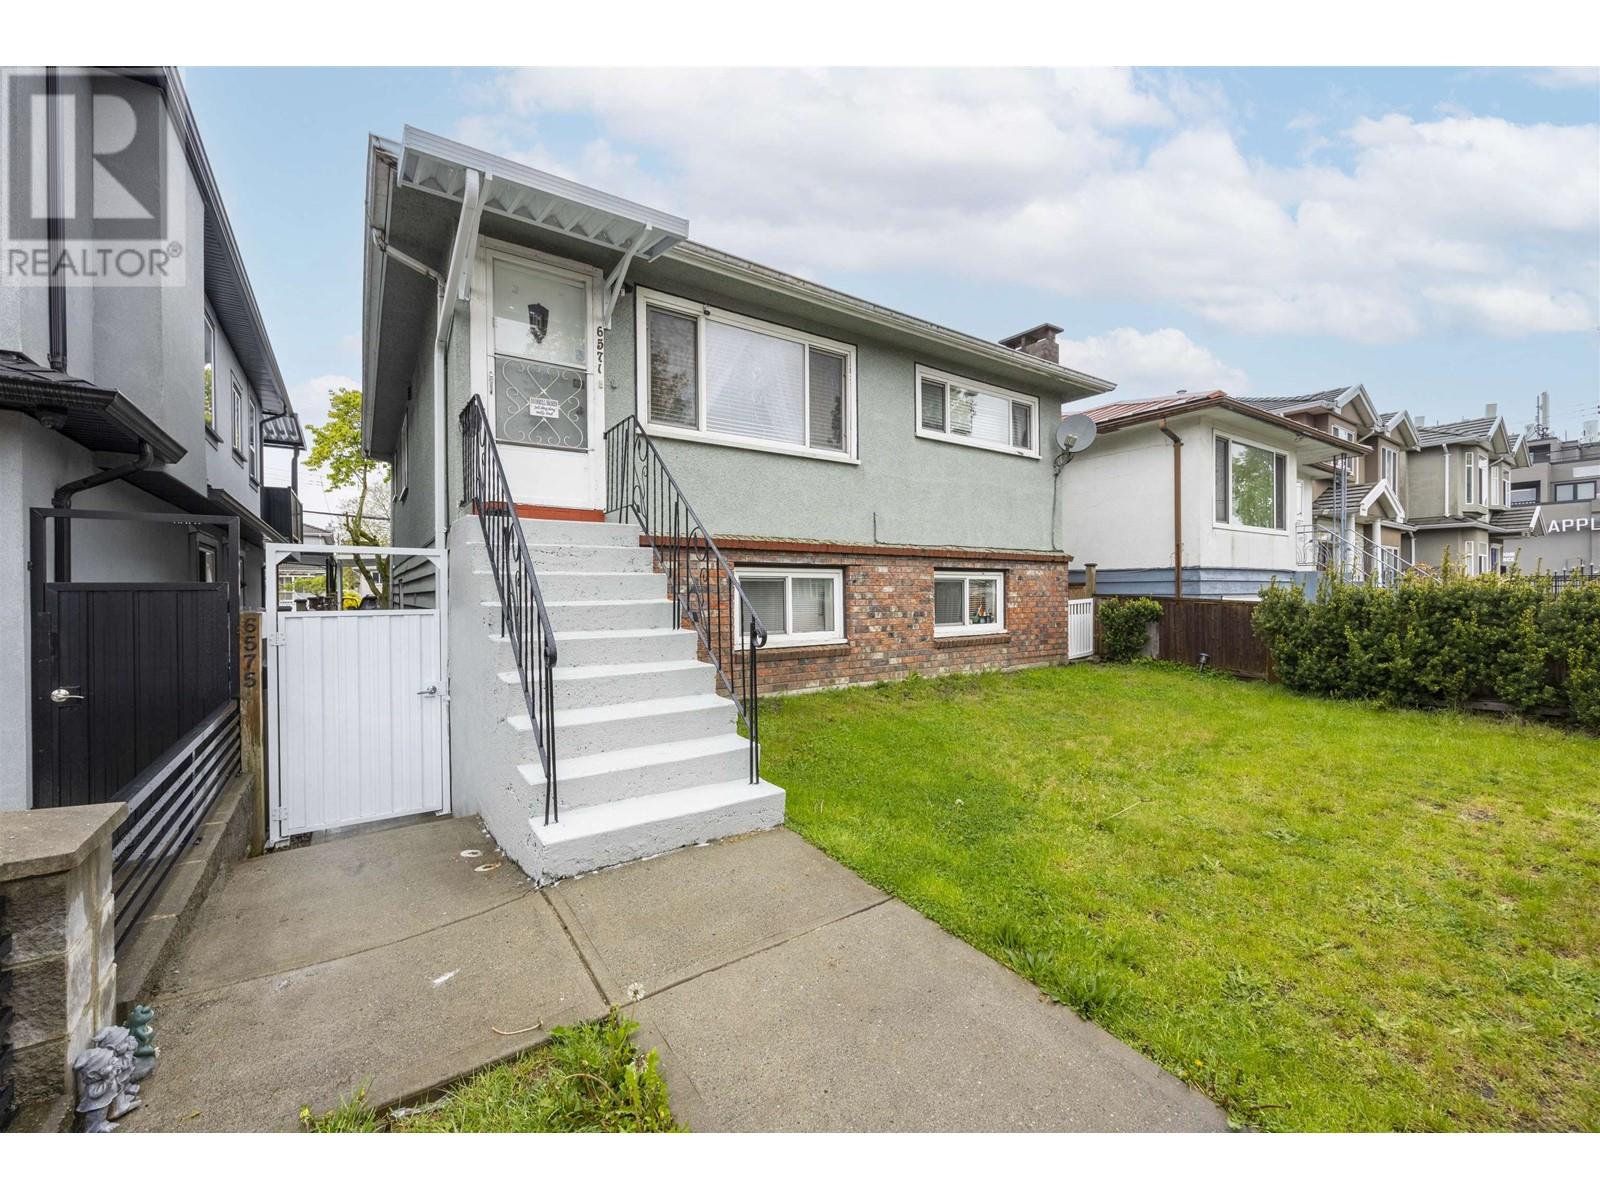 Listing Picture 19 of 21 : 6571 KNIGHT STREET, Vancouver / 溫哥華 - 魯藝地產 Yvonne Lu Group - MLS Medallion Club Member